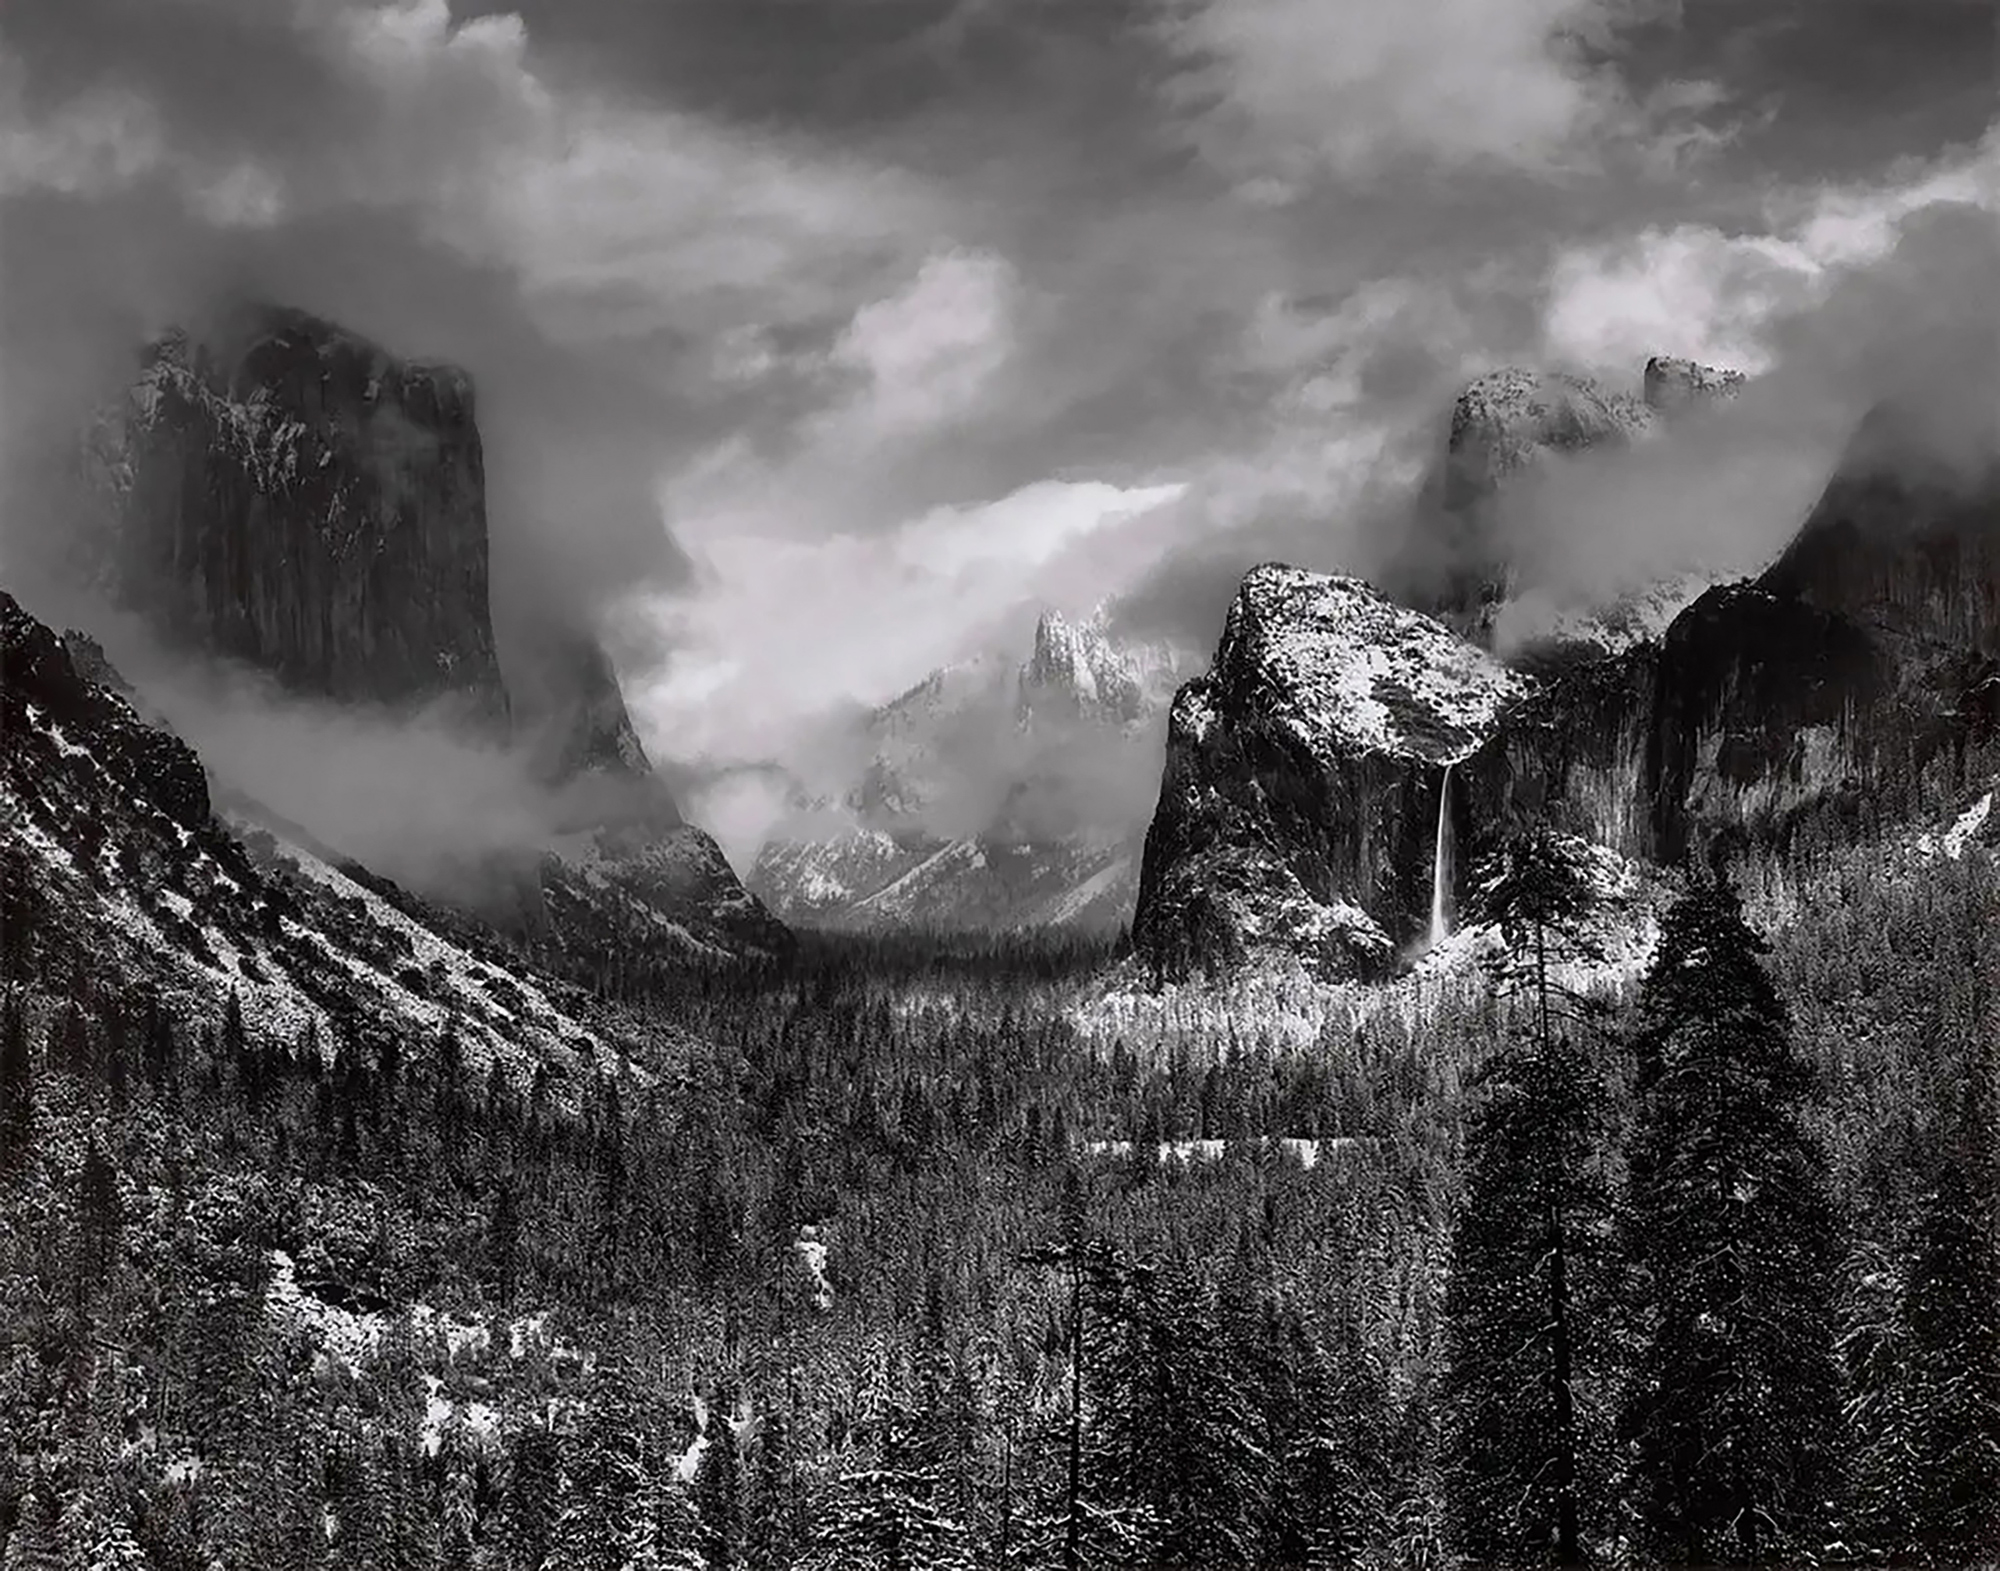 Clearing Winter Storm, Ansel Adams